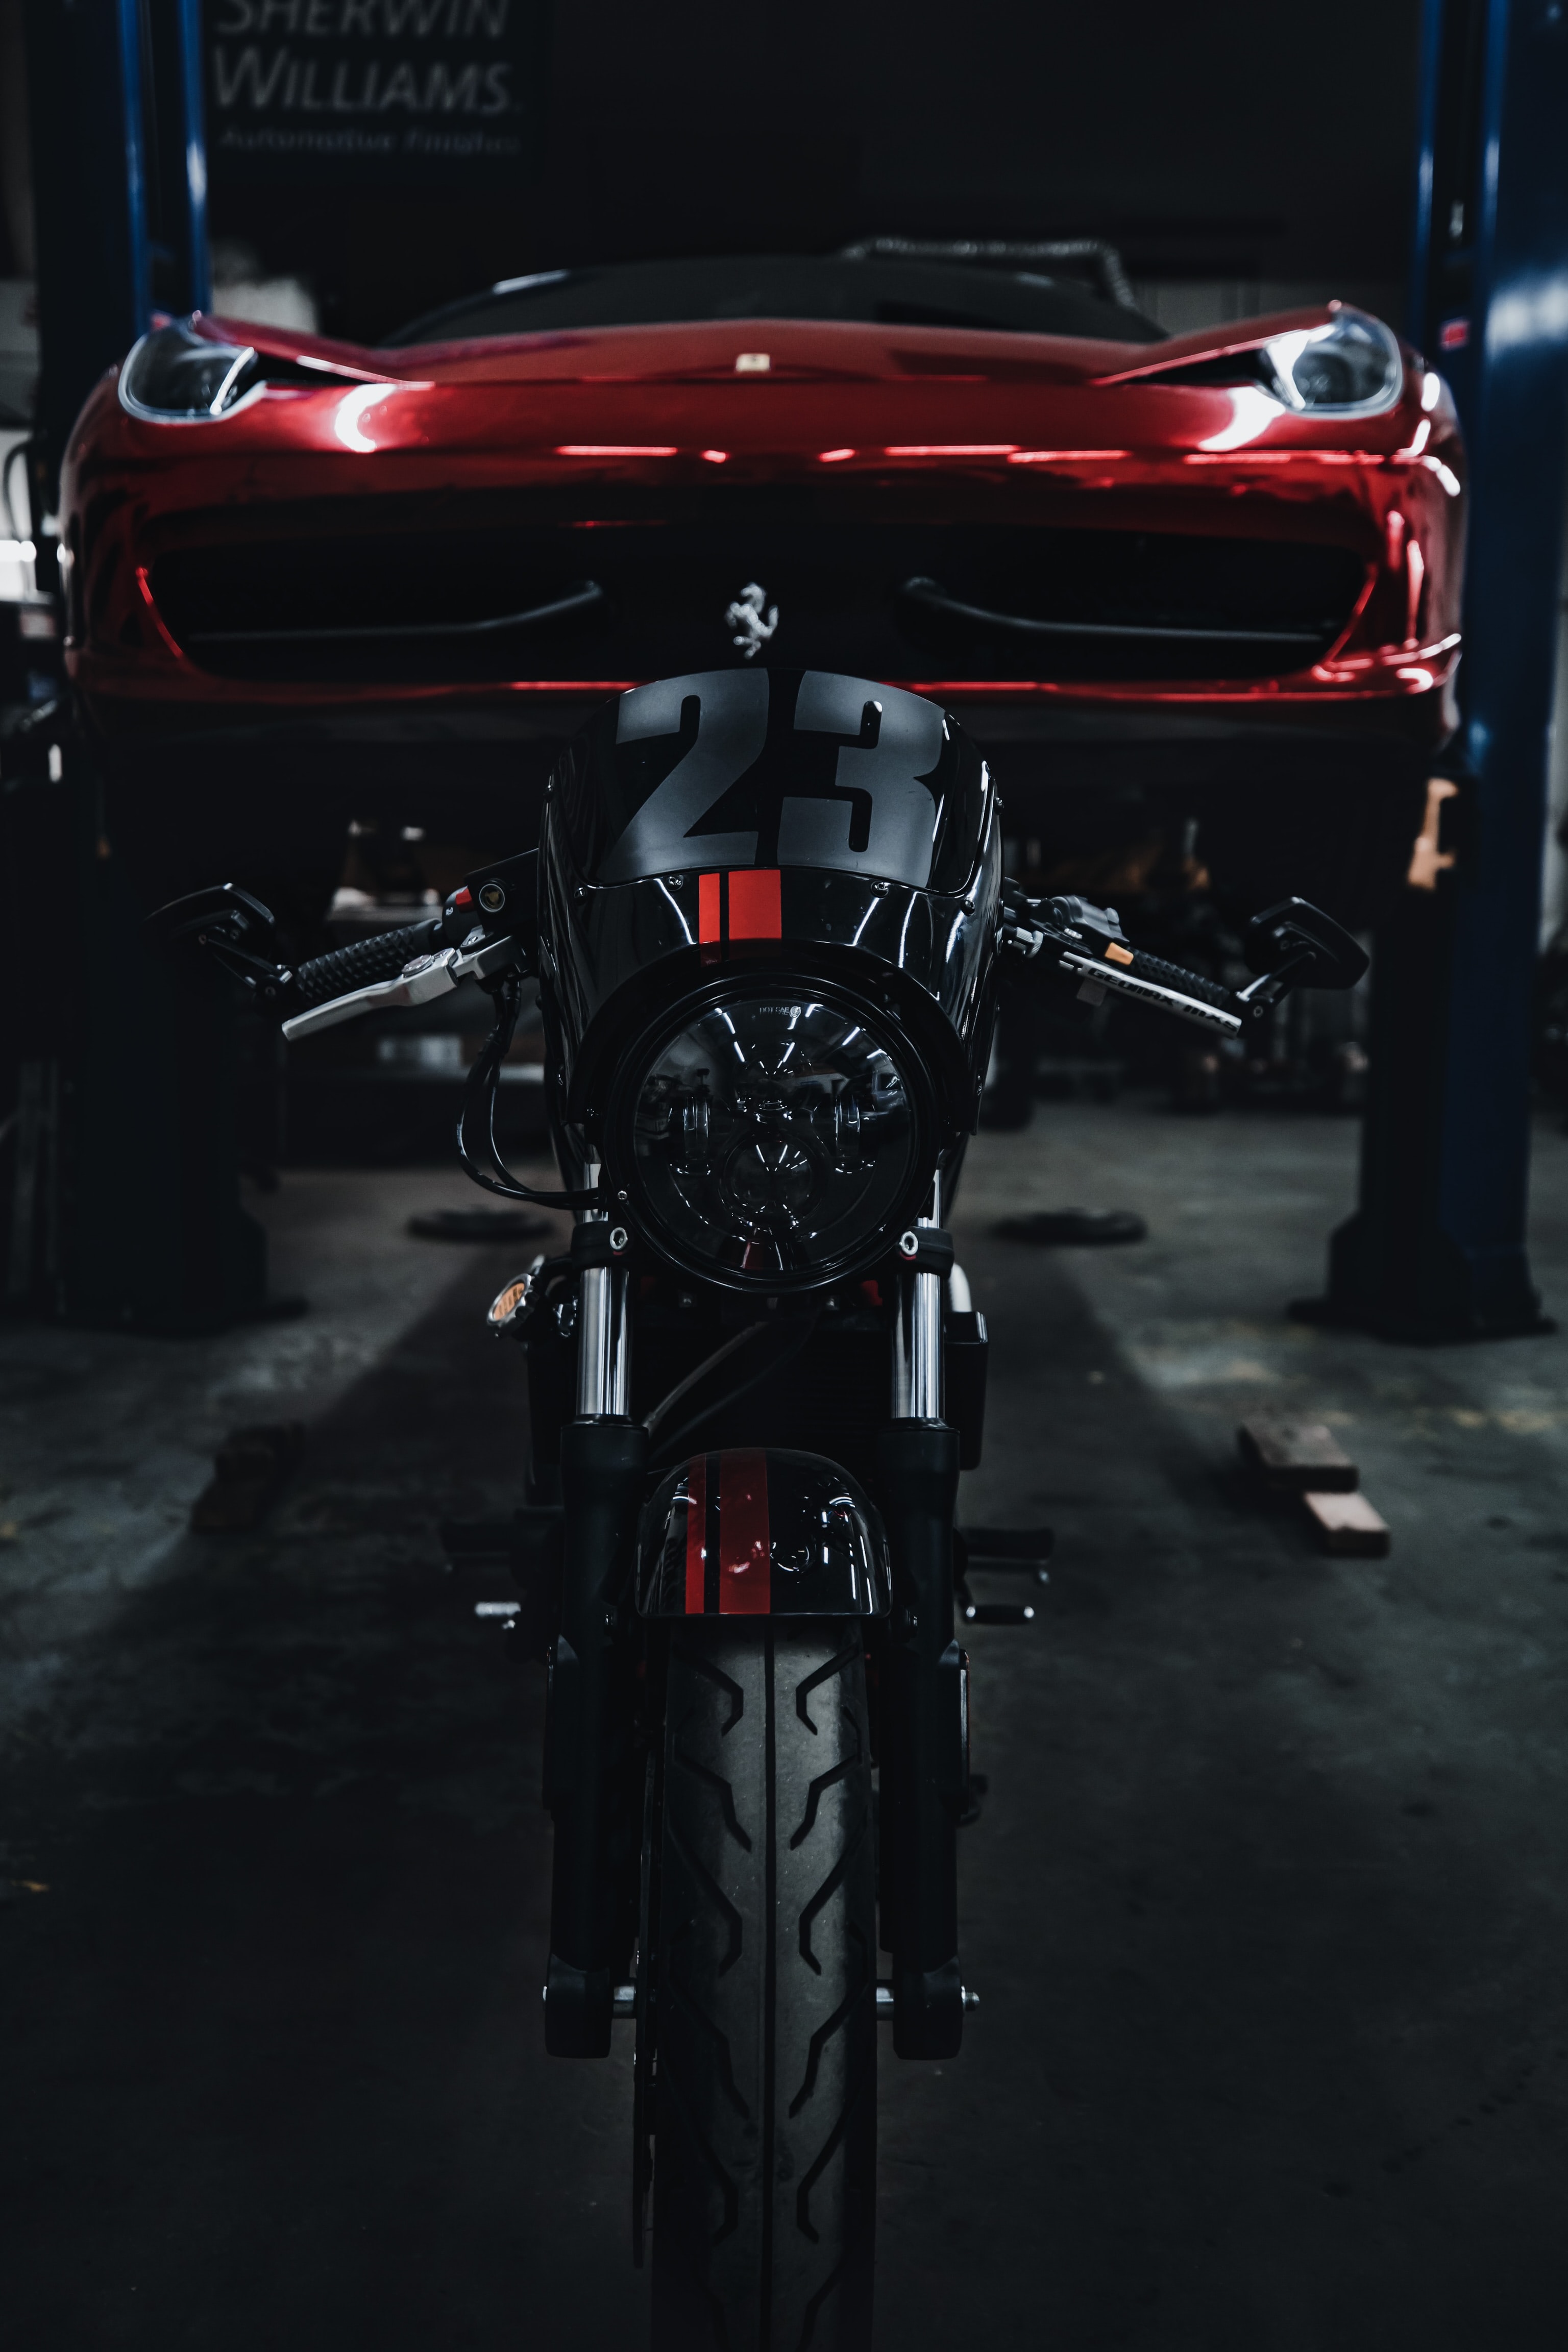 Windows Backgrounds bike, motorcycles, black, red, car, motorcycle